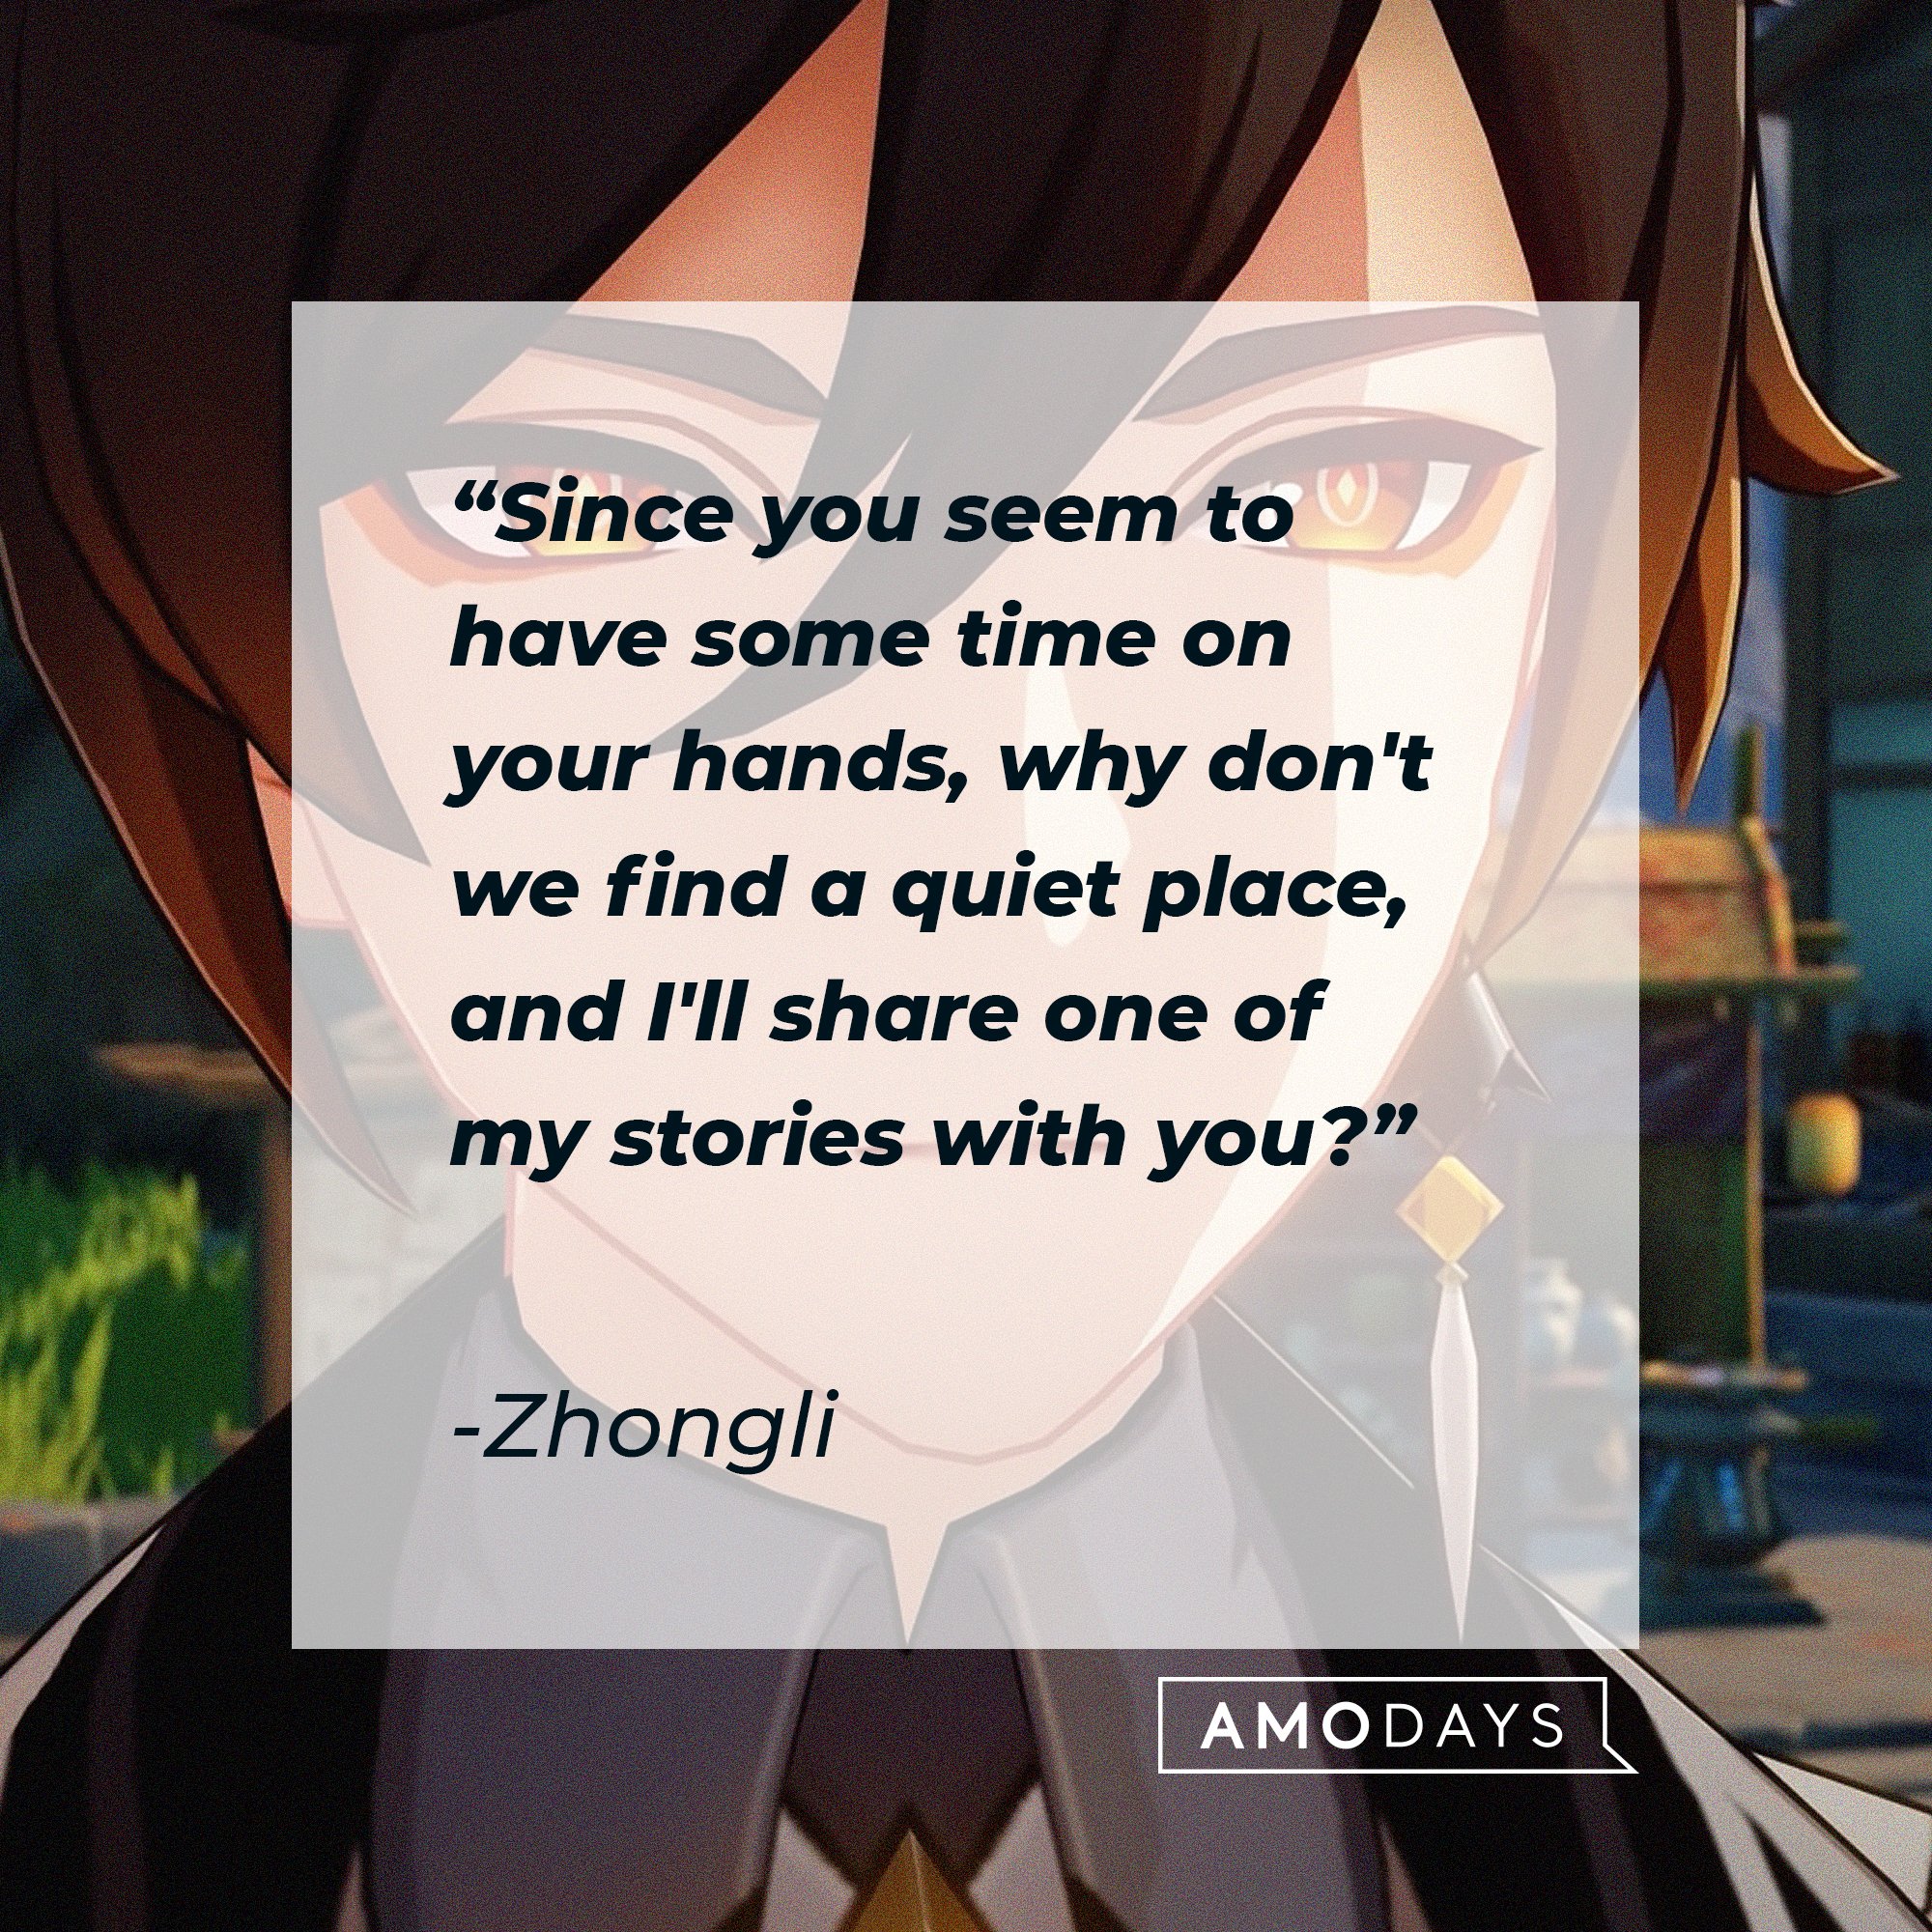 Zhongli’s quote: "Since you seem to have some time on your hands, why don't we find a quiet place, and I'll share one of my stories with you?"  | Image: AmoDays